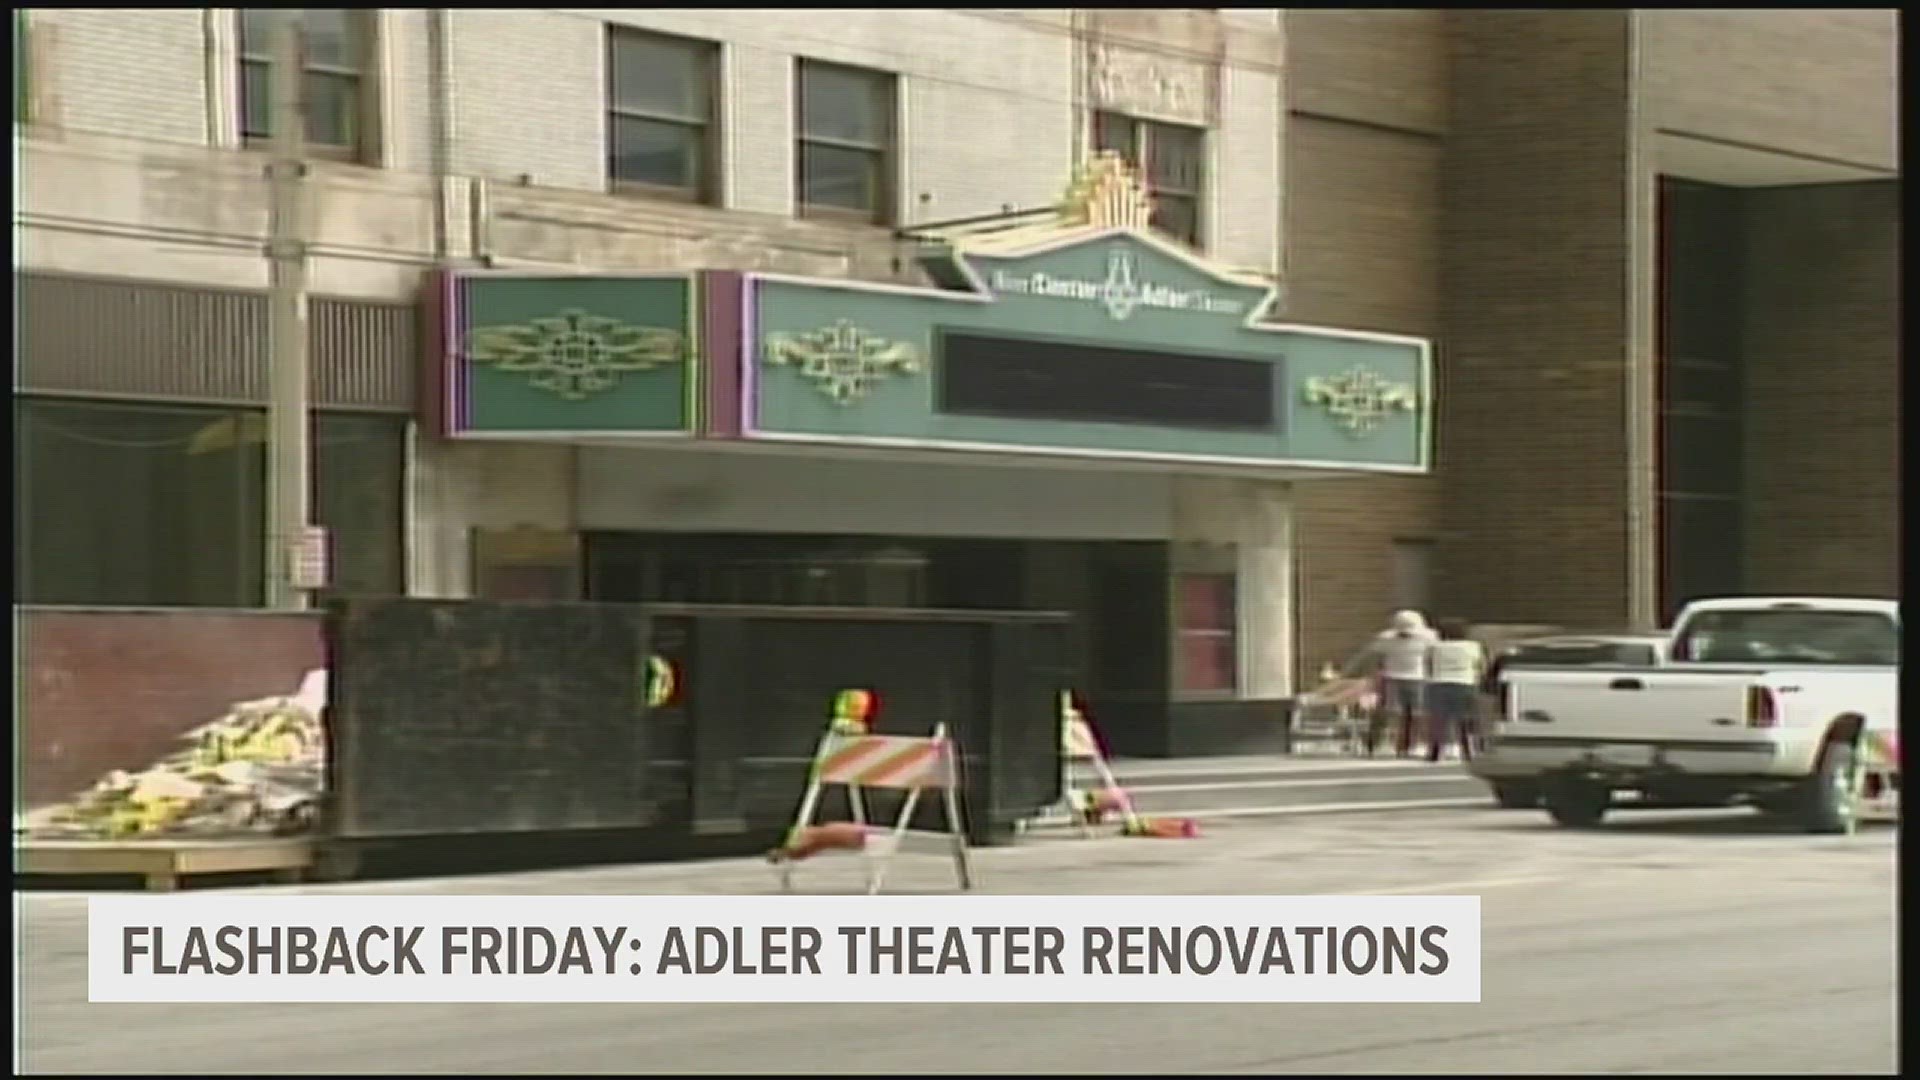 Davenports Adler Theater goes through major renovations. A plan that made it operate like a modern performing arts center.